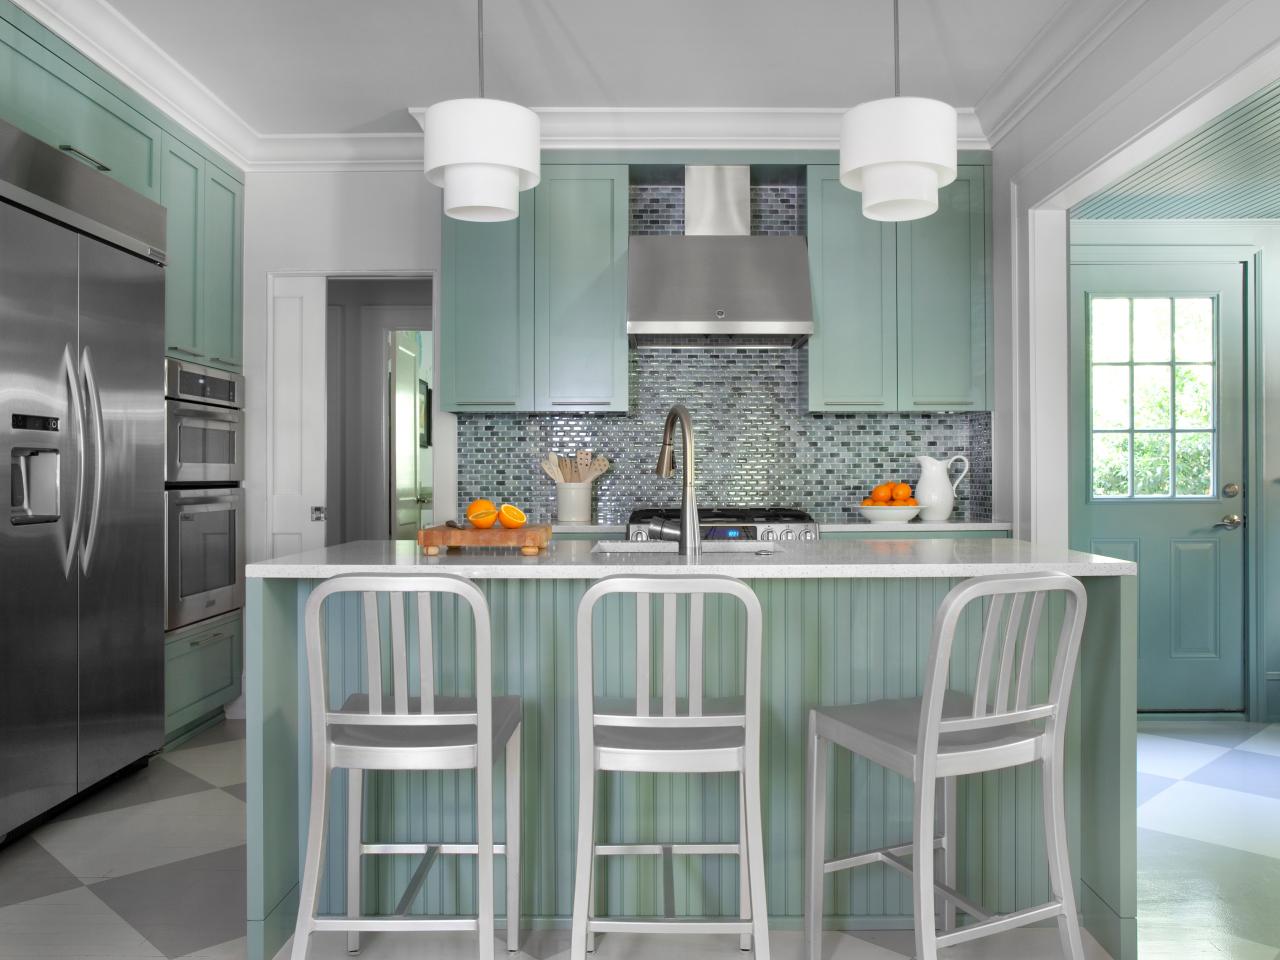 Ideas For Painting Kitchen Cabinets Pictures From HGTV HGTV